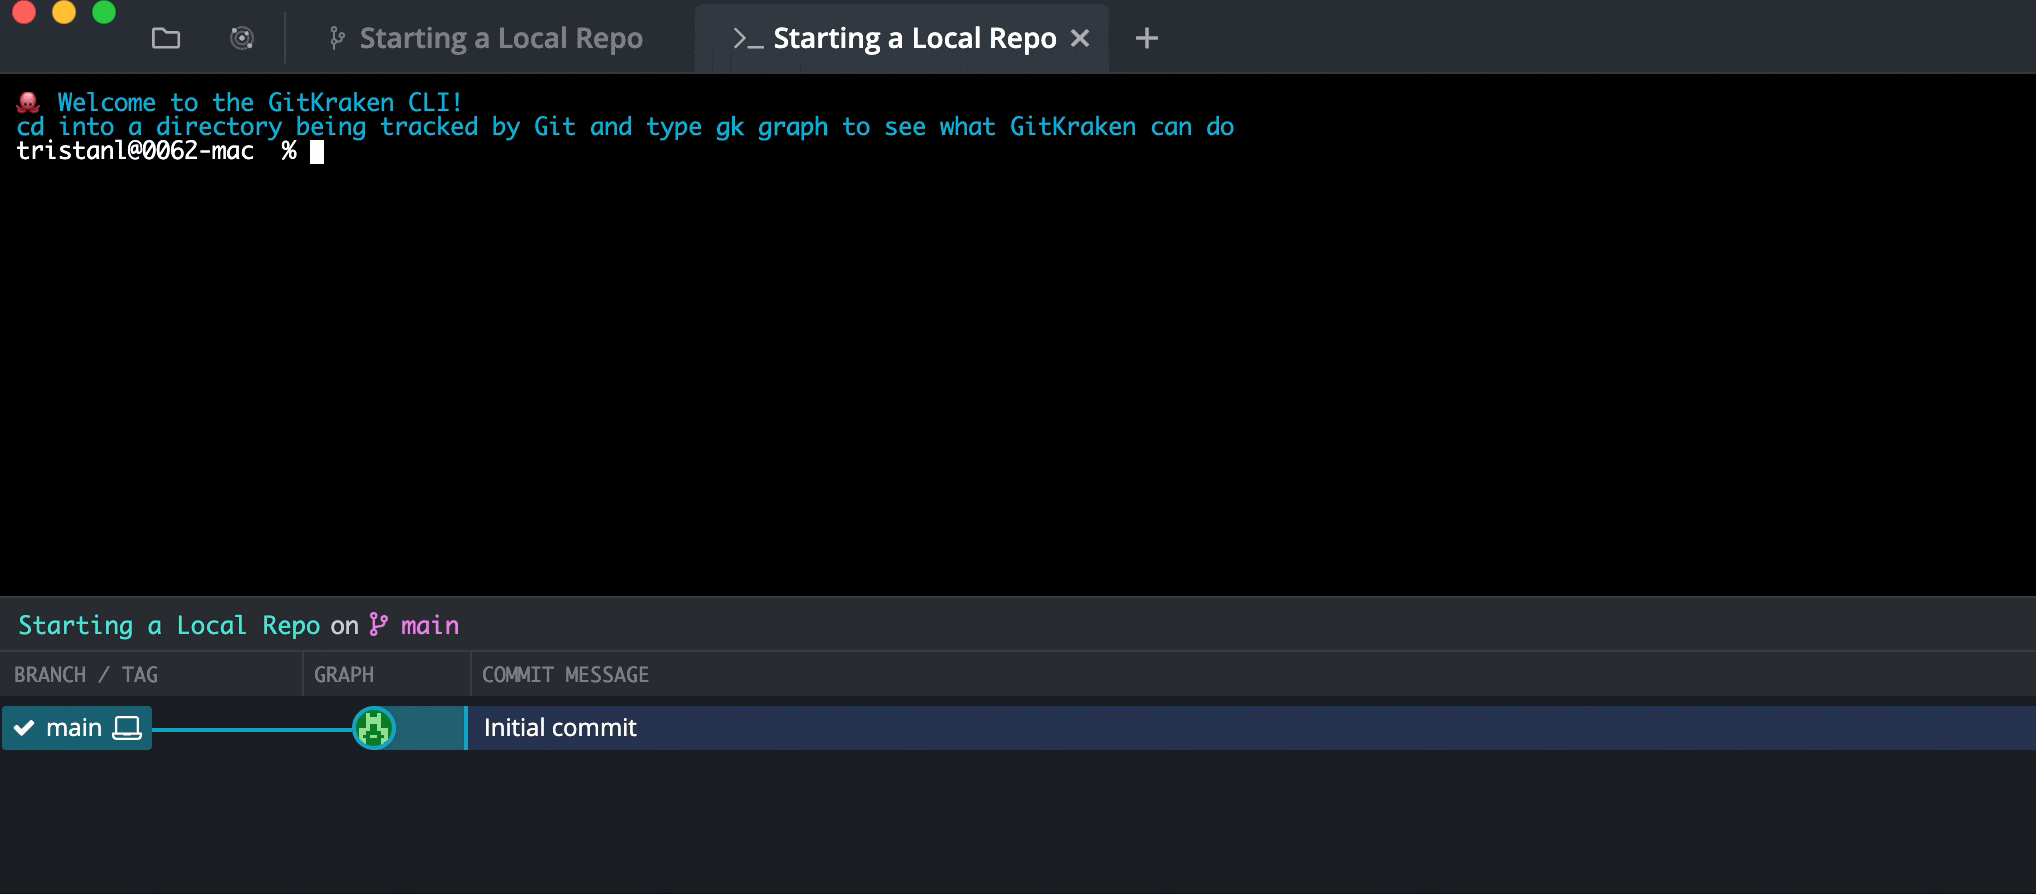 Short looping video depicts the process of connecting a remote repo with GitKraken Client's CLI